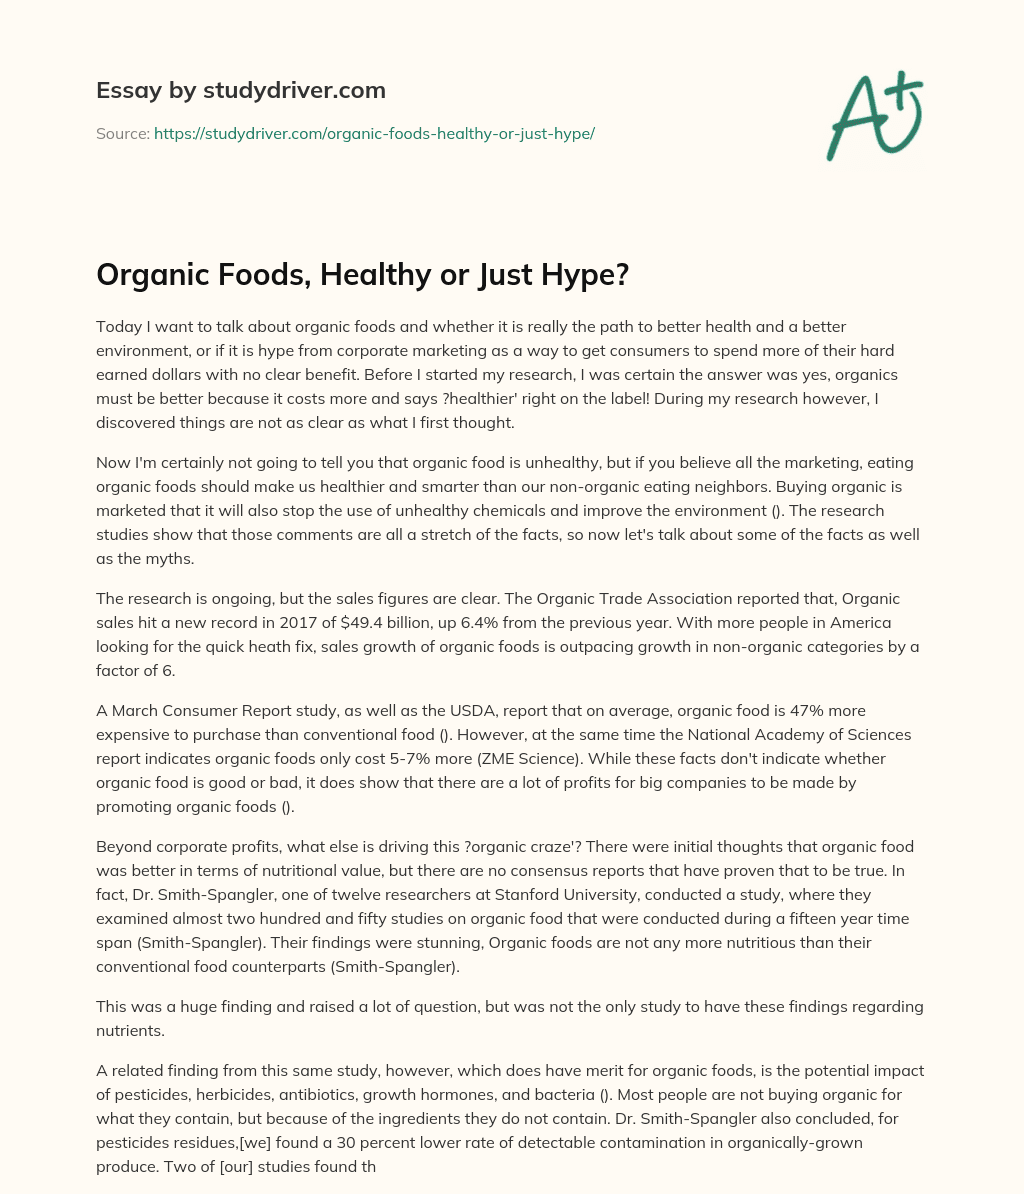 Organic Foods, Healthy or Just Hype? essay